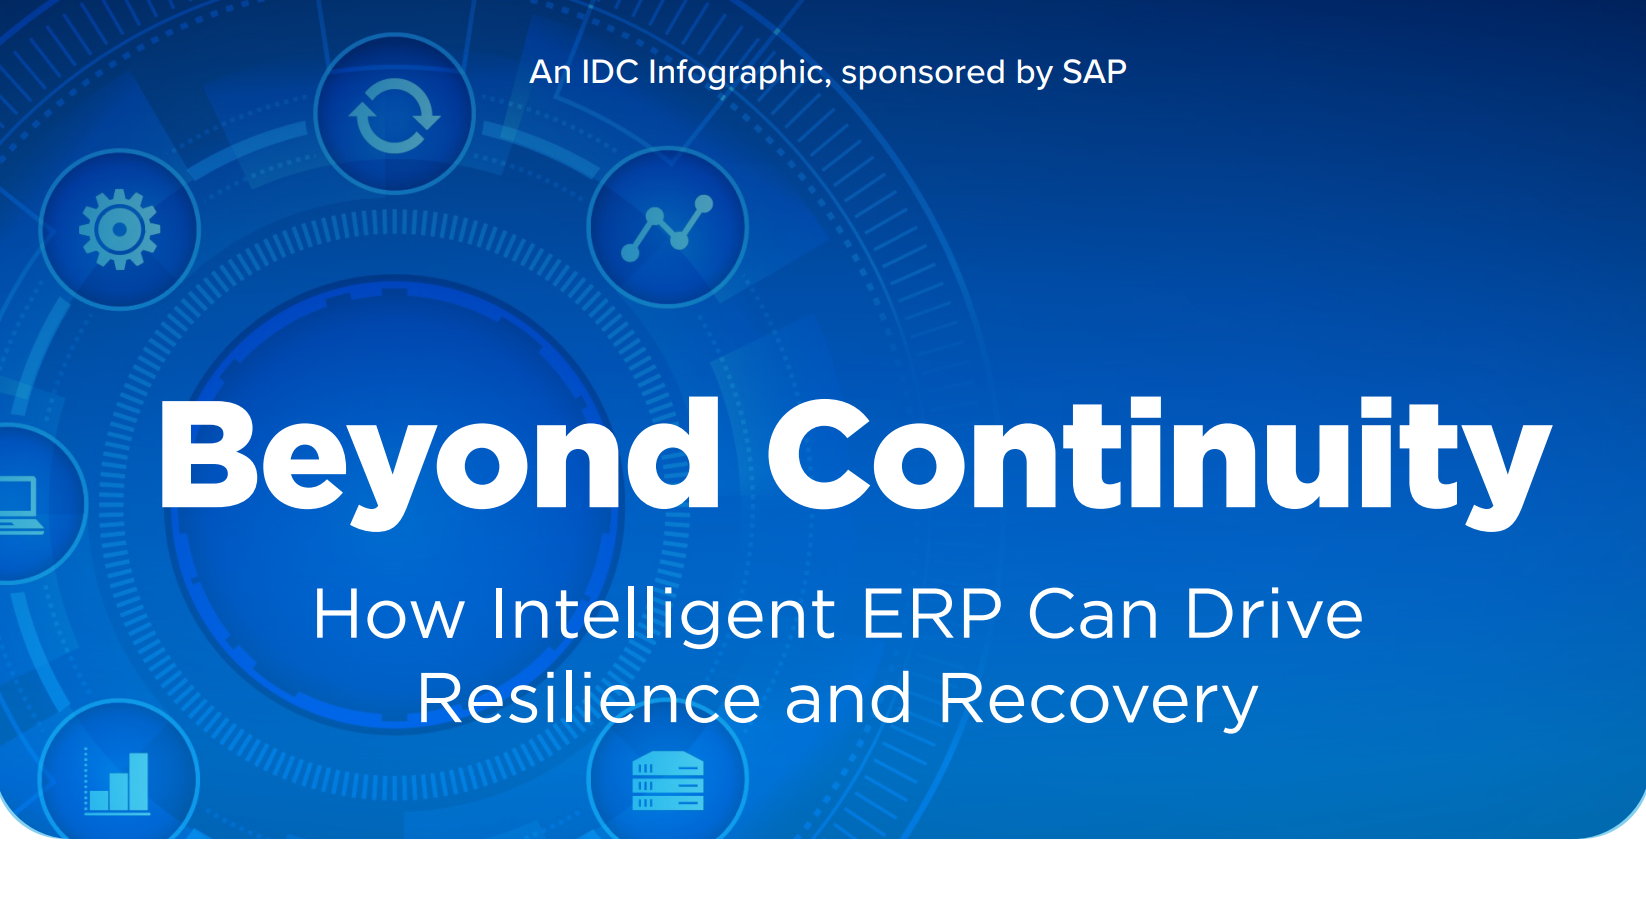 How intelligent ERP can boost resilience and recovery